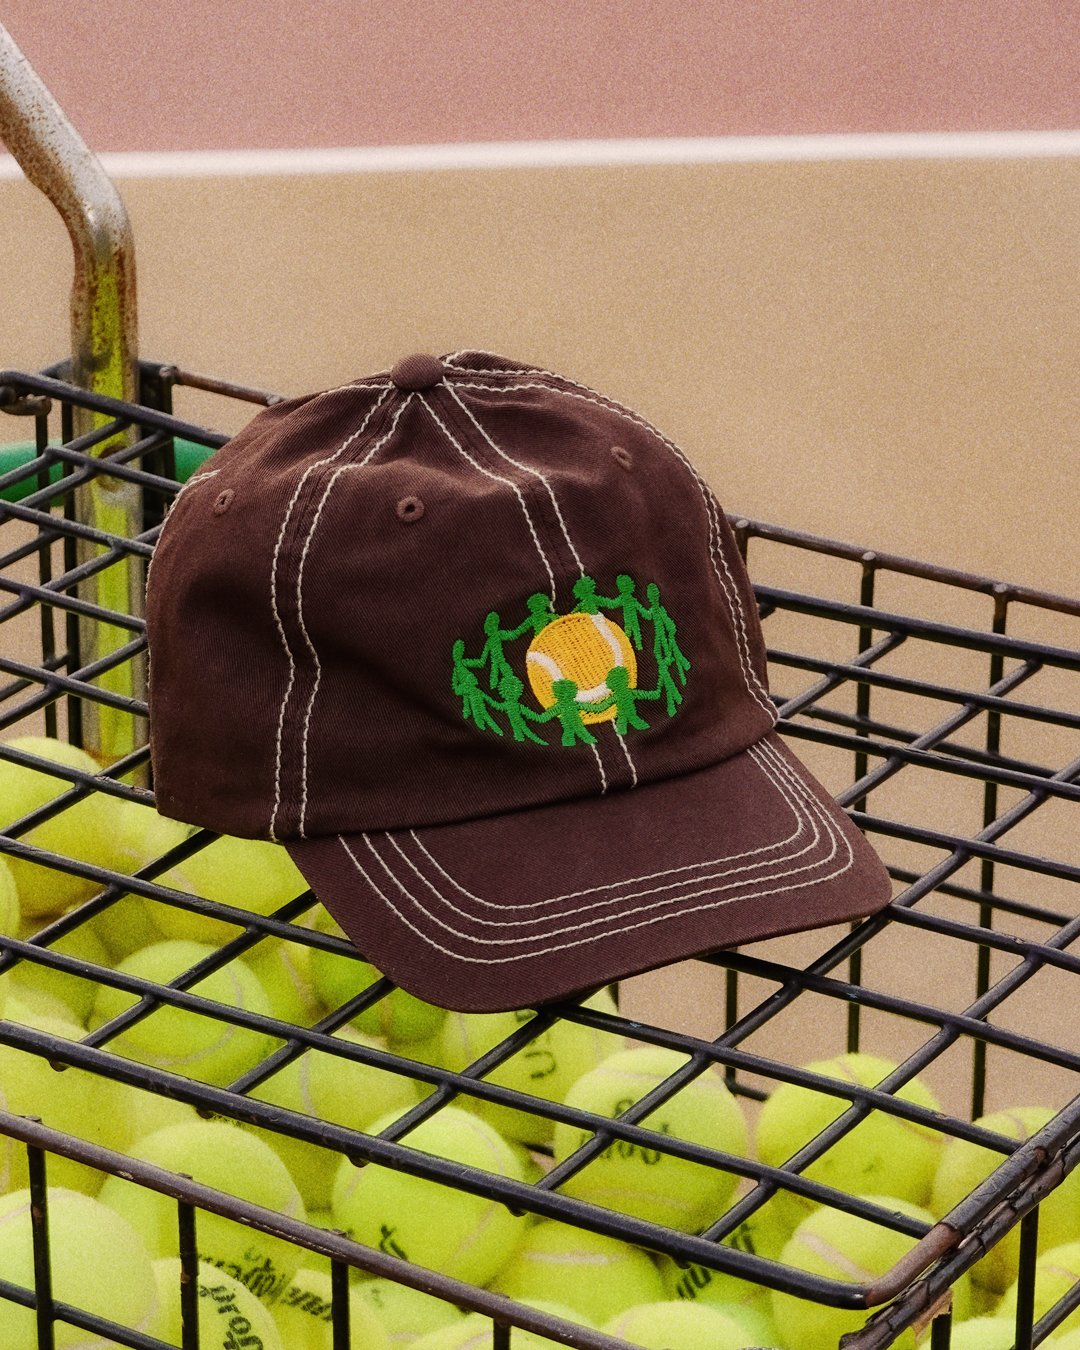 Image of Play Together Hat - Brown